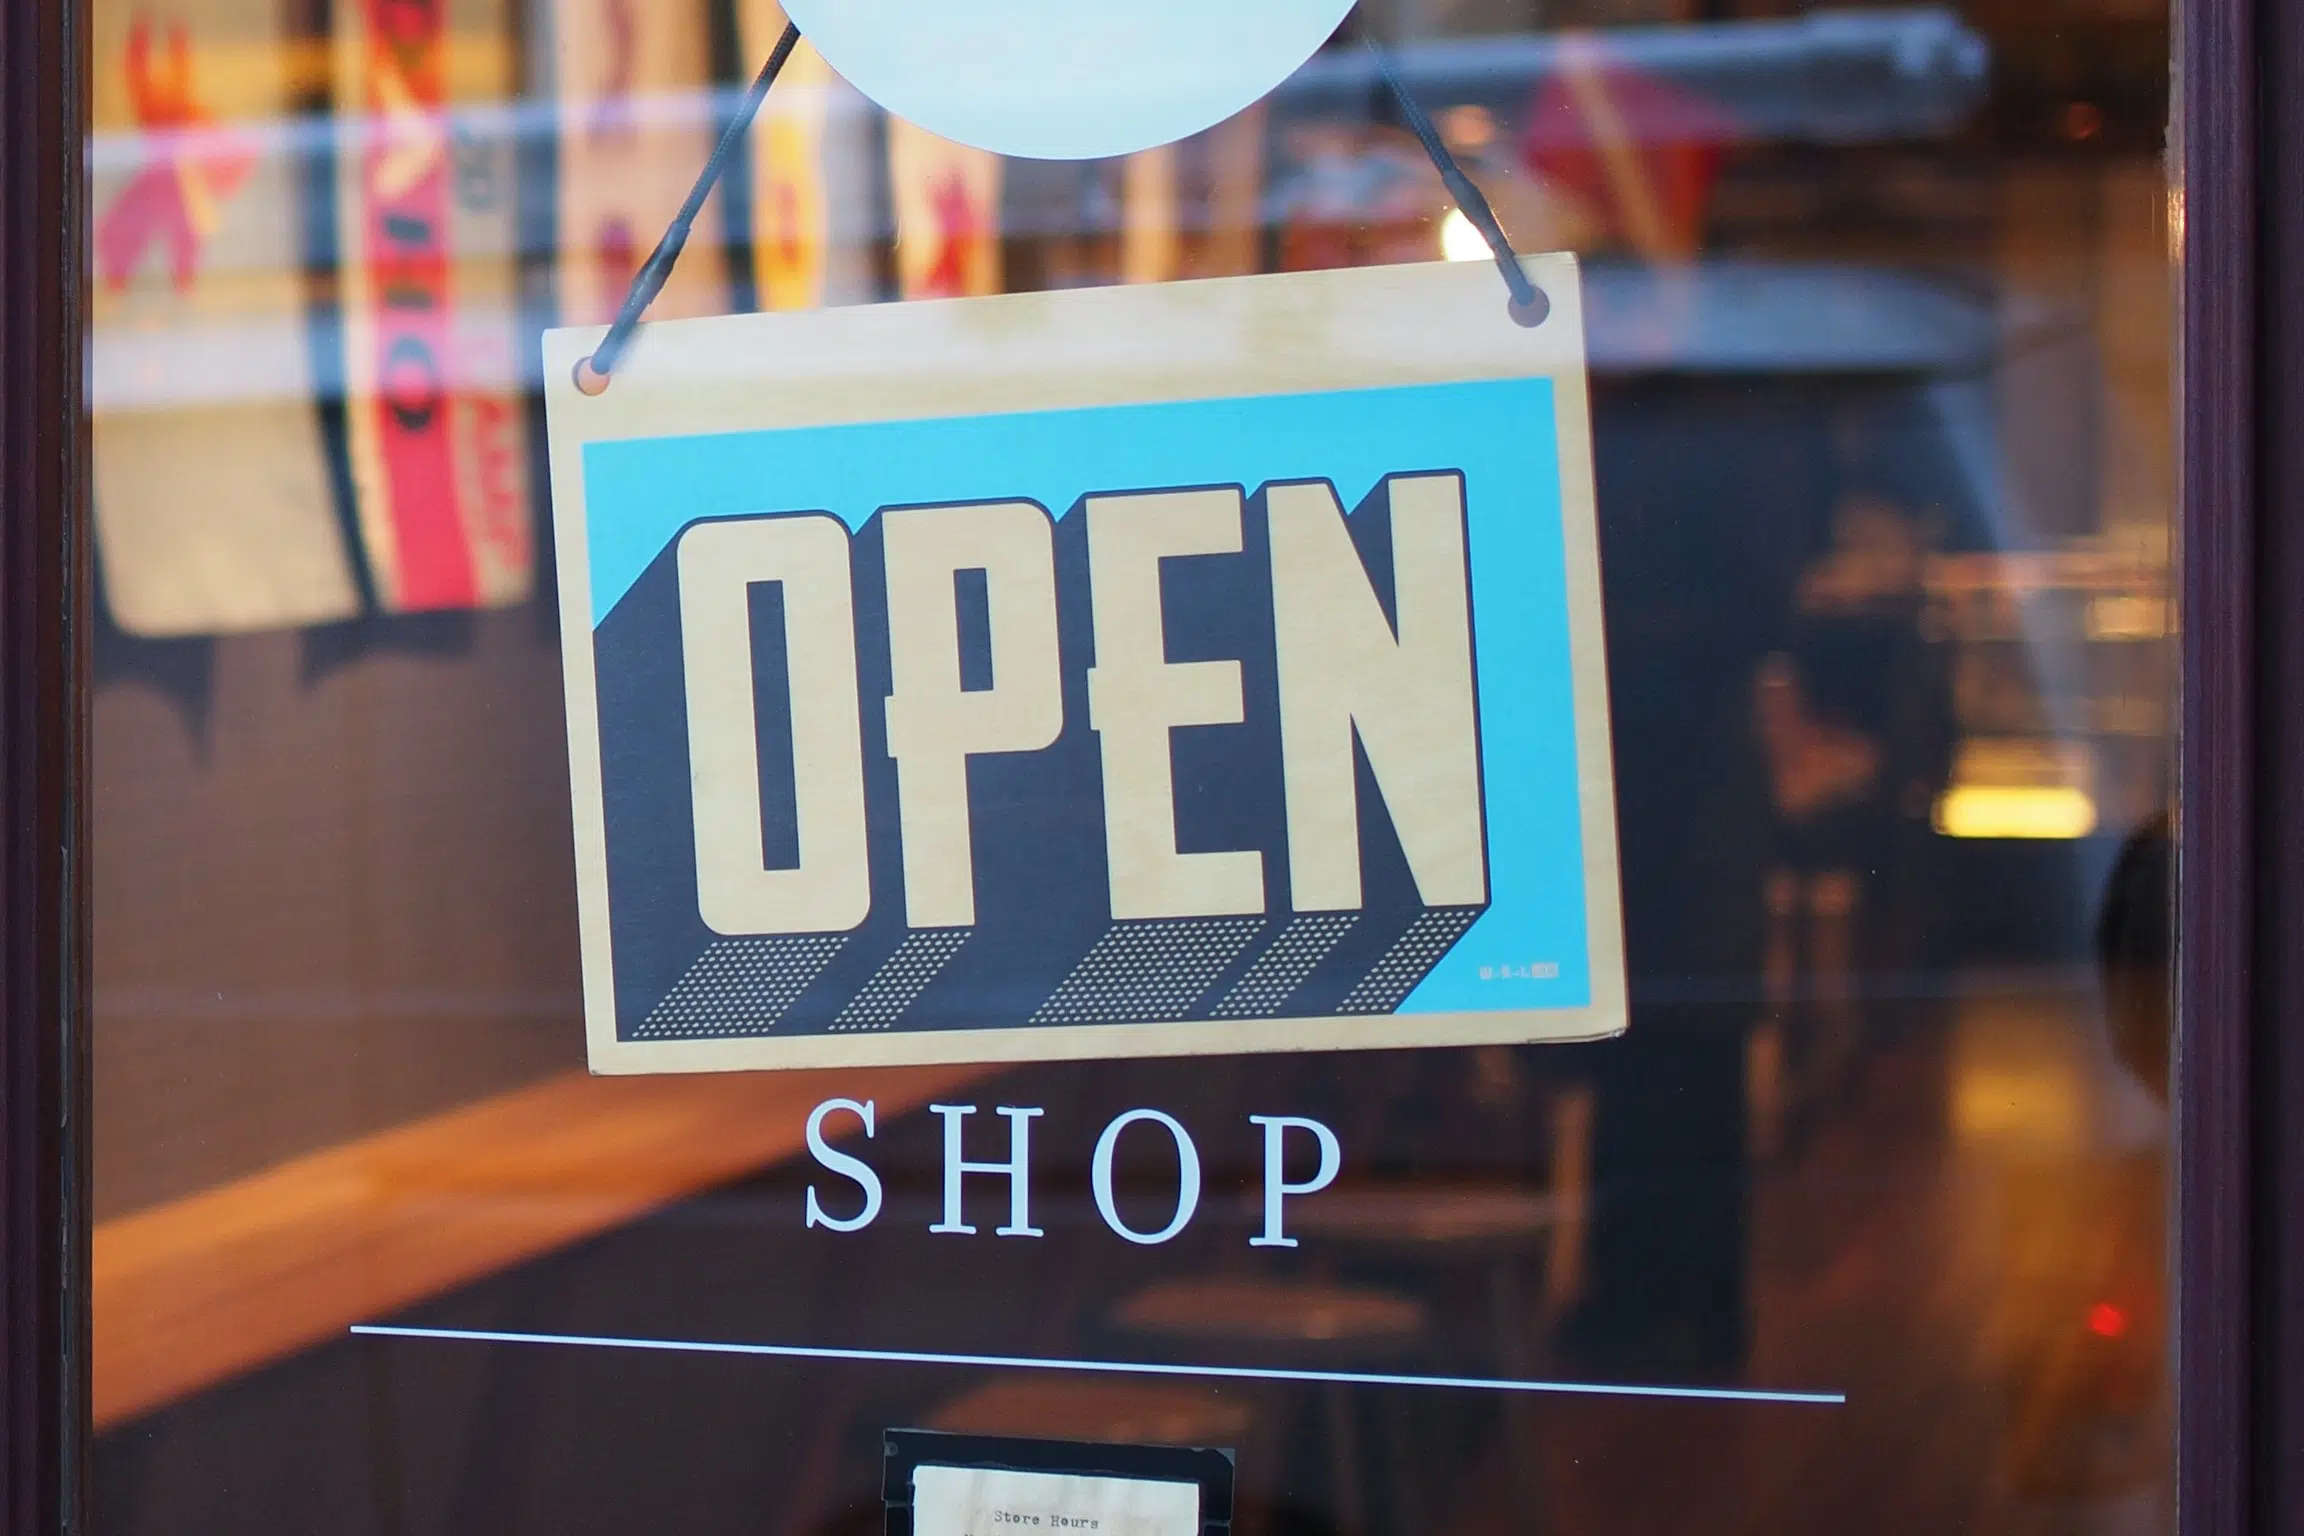 Small businesses don't think their municipality prioritizes local stores: CFIB